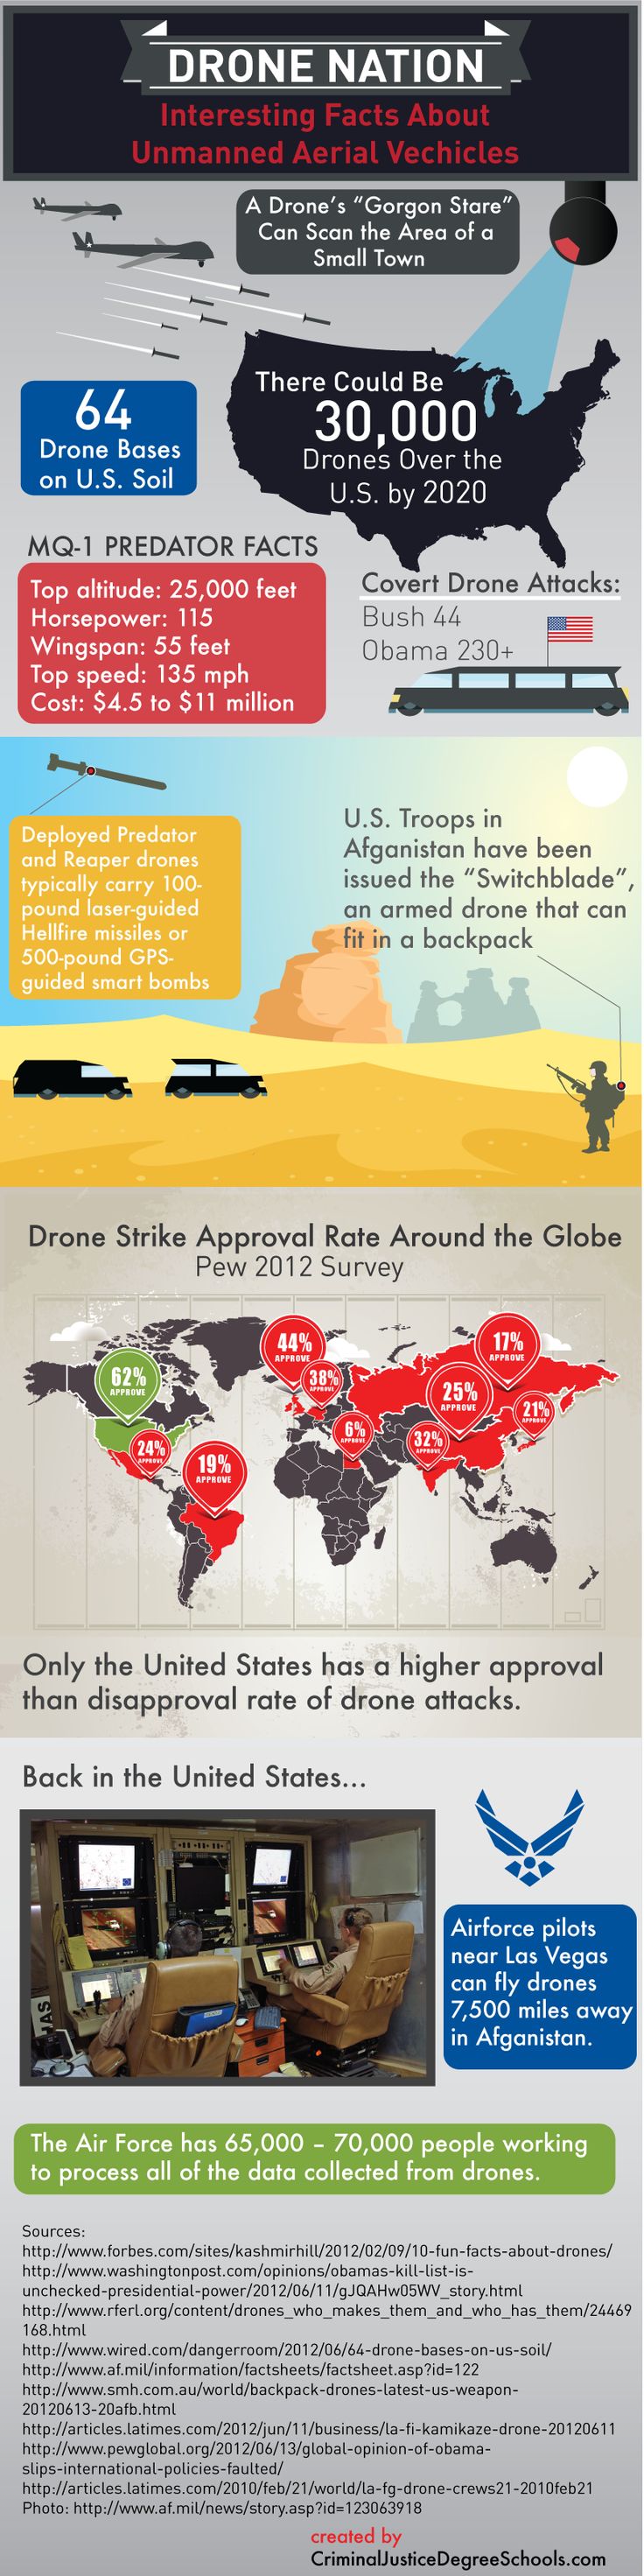 Drone Nation: Interesting Facts About Unmanned Aerial Vehicles [INFOGRAPHIC]